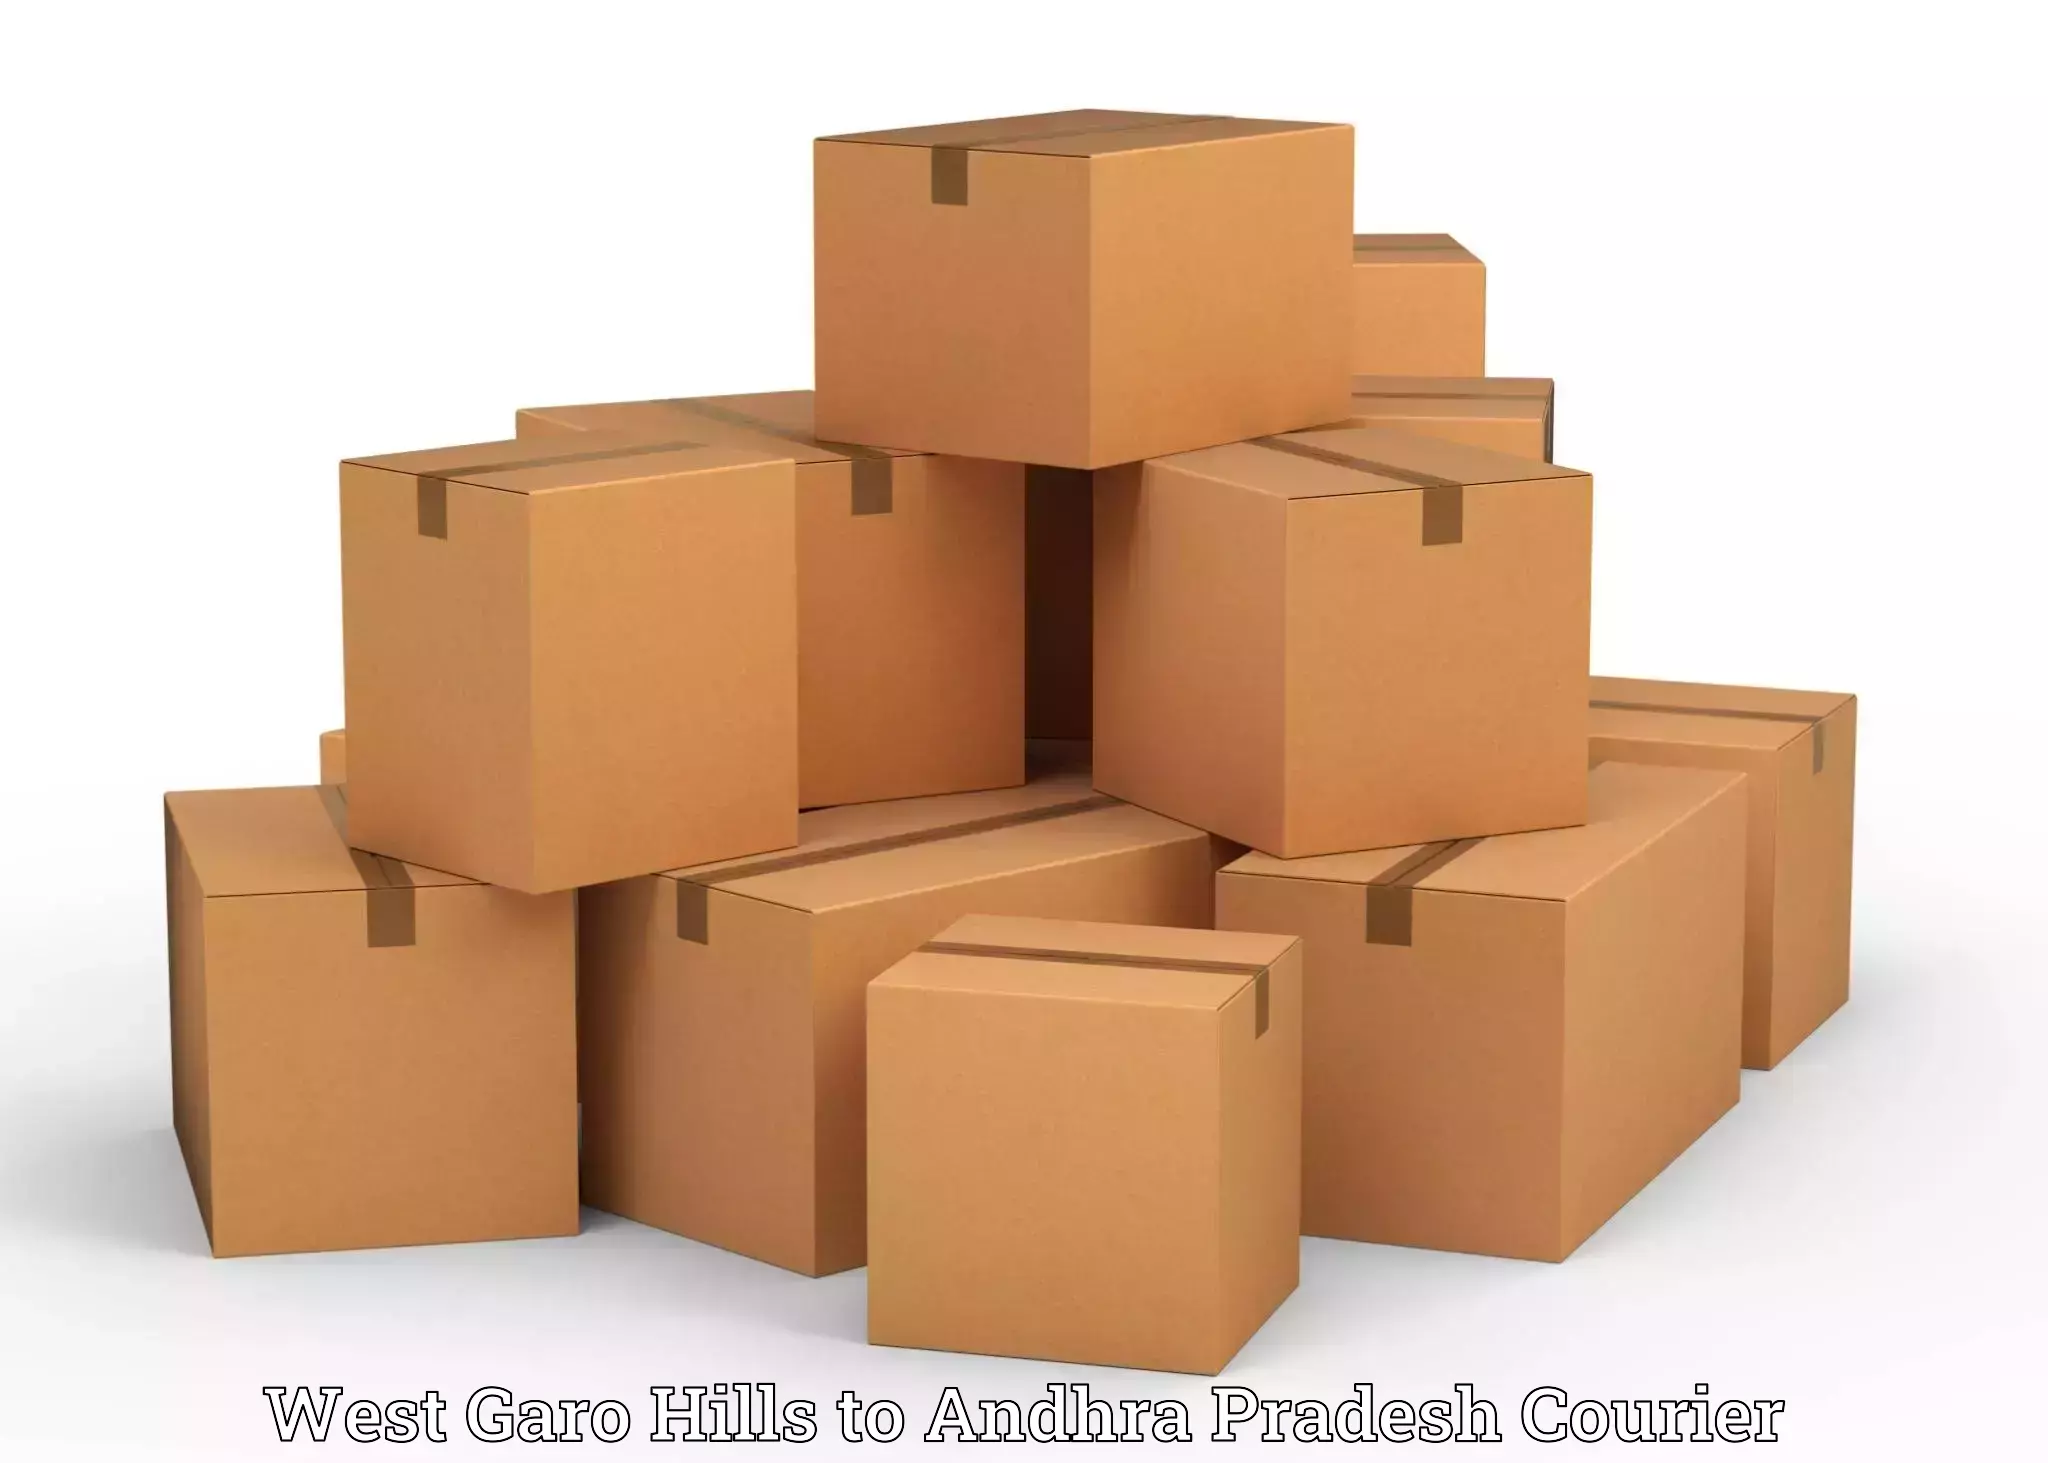 Professional packing services West Garo Hills to Srisailam